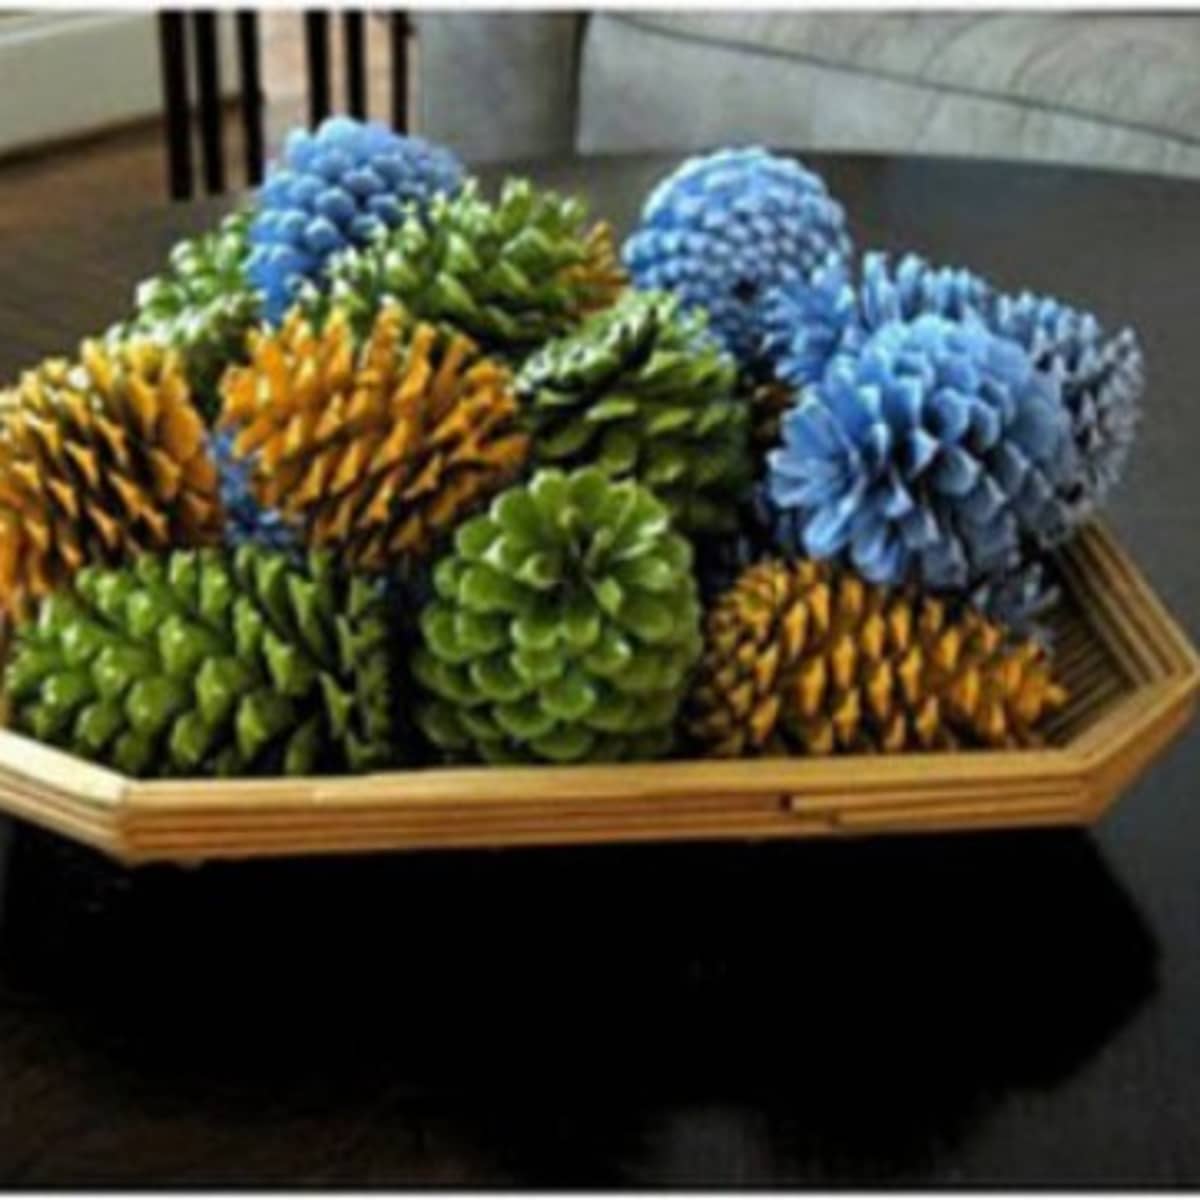 How to Make Quick and Easy Pine Cone Picks  Pine cone decorations,  Christmas pine cones, Pine cone crafts